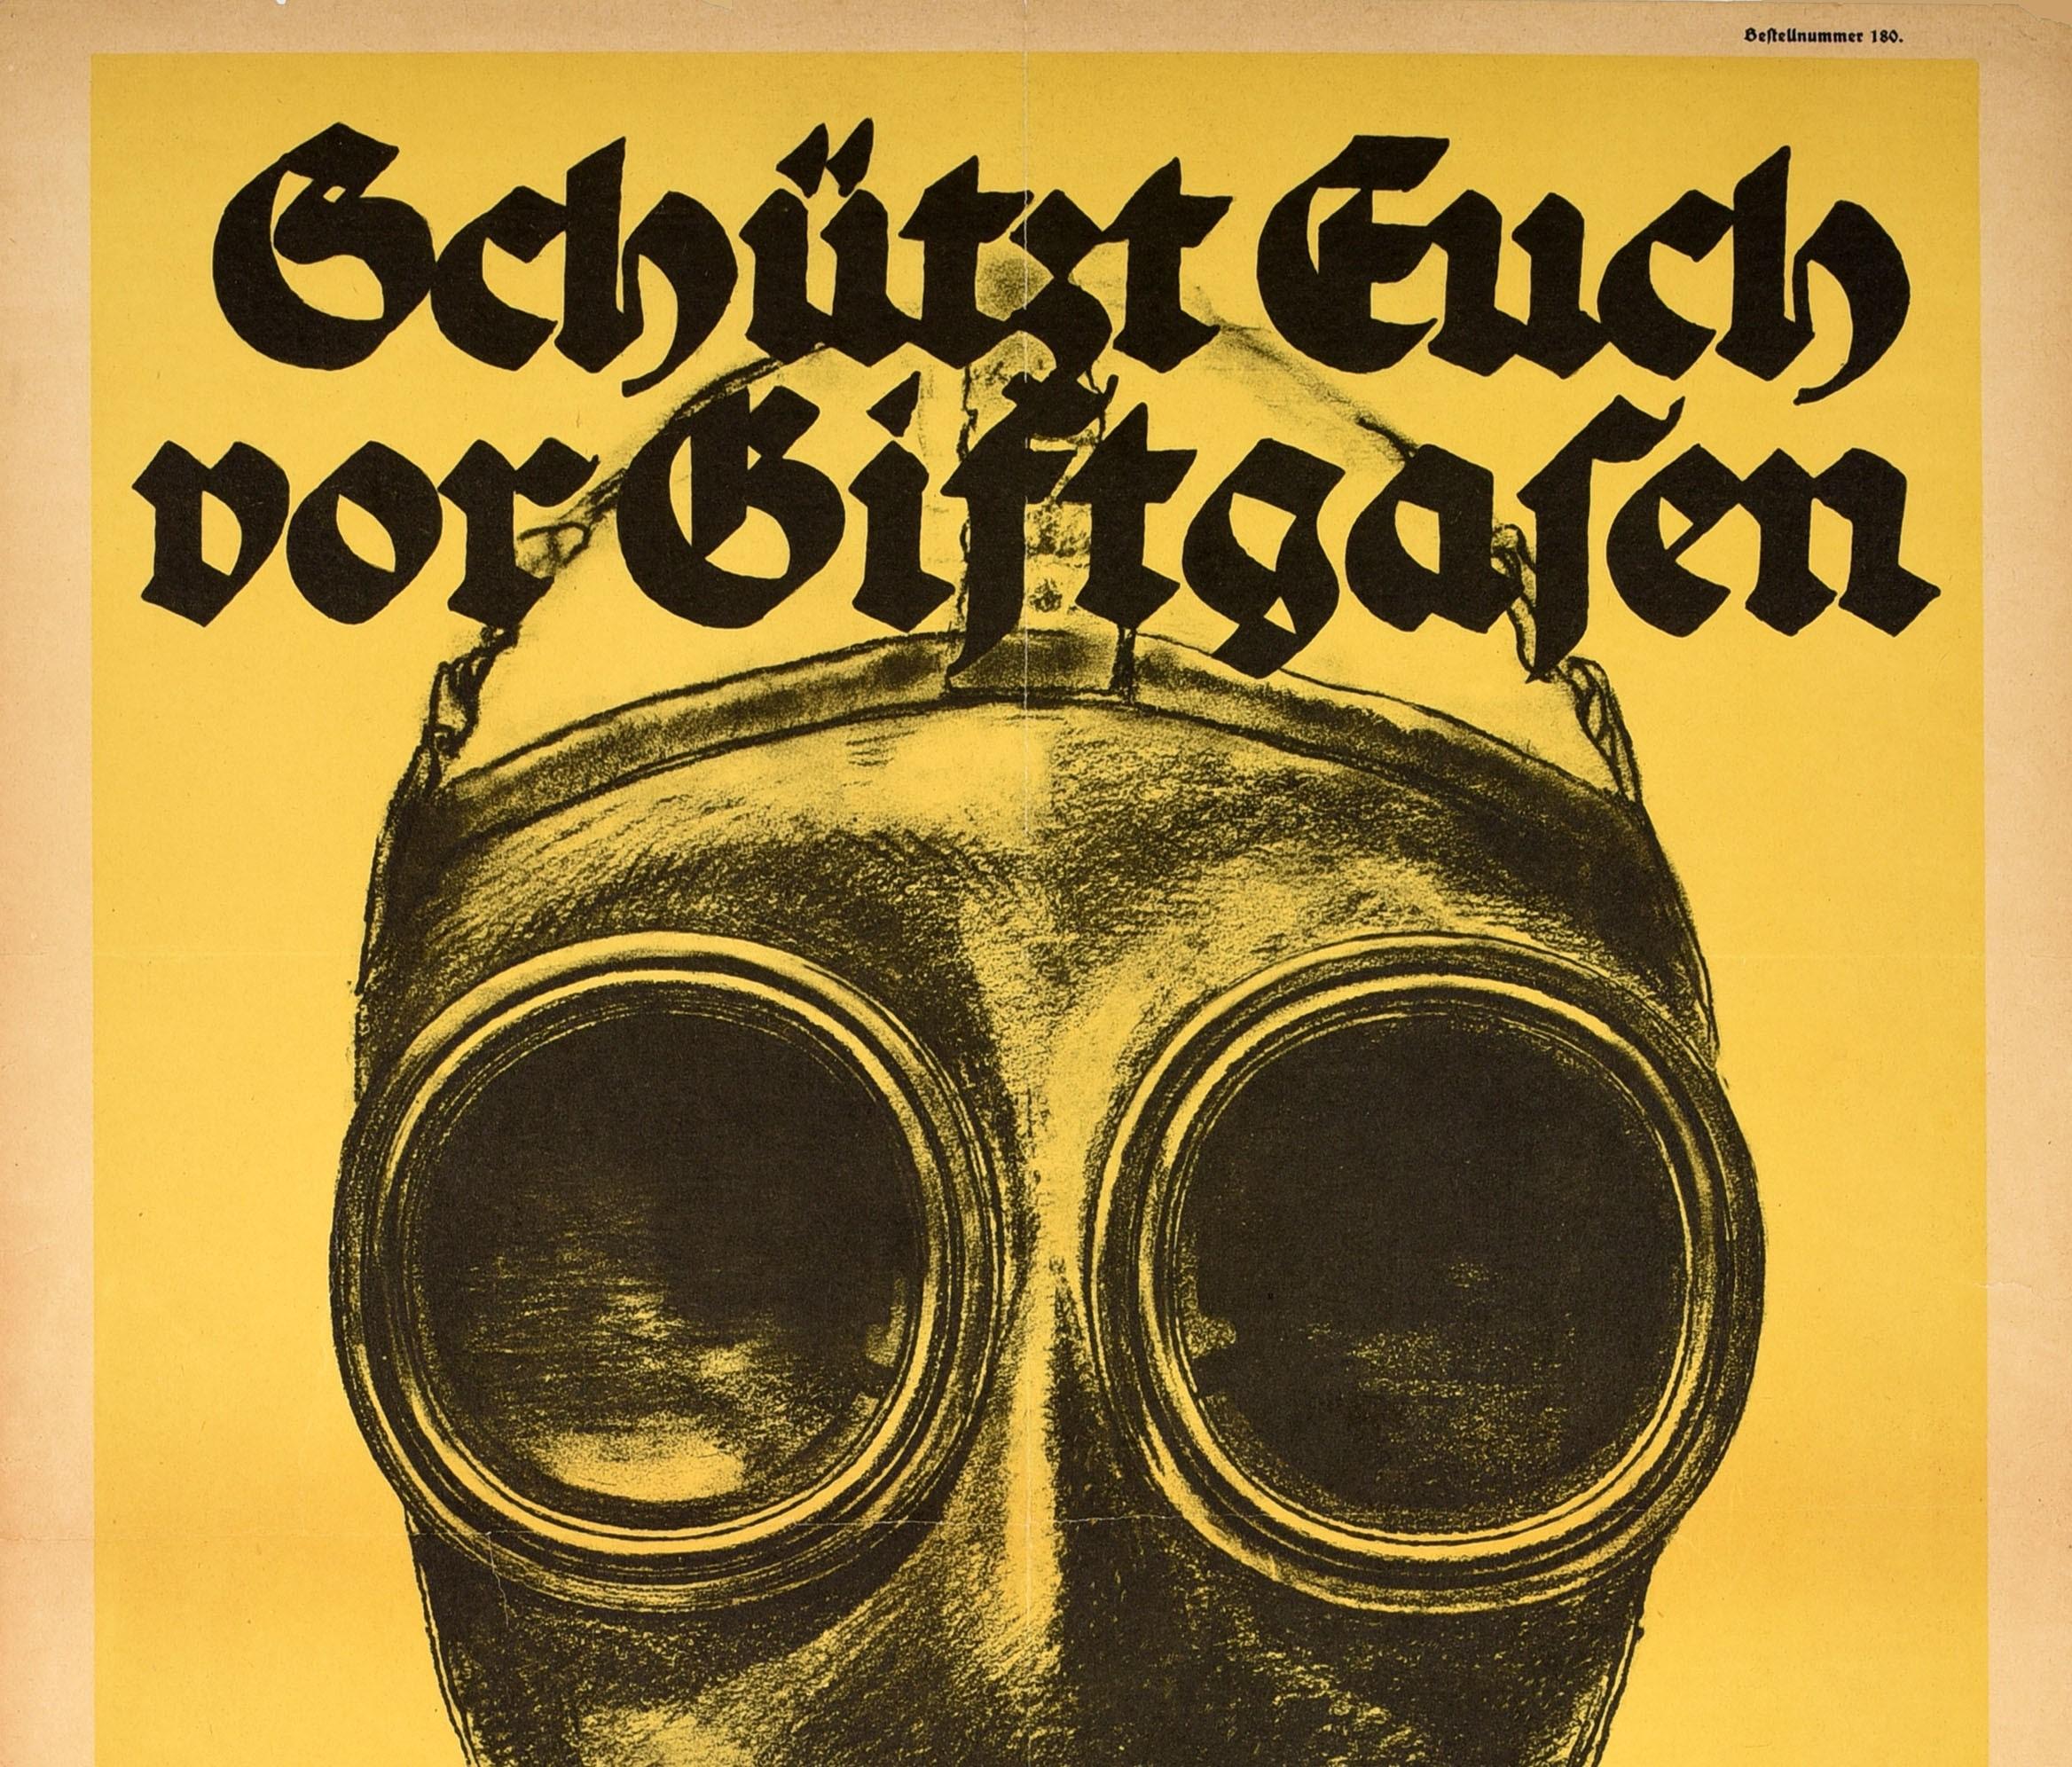 Original antique World War One health and safety propaganda poster - Protect yourself from poison gases Wear gas masks! / Schutzt Euch Vor Giftgasen Tragt Gasmasken! - featuring an image of a gas mask with the text in bold Gothic style lettering